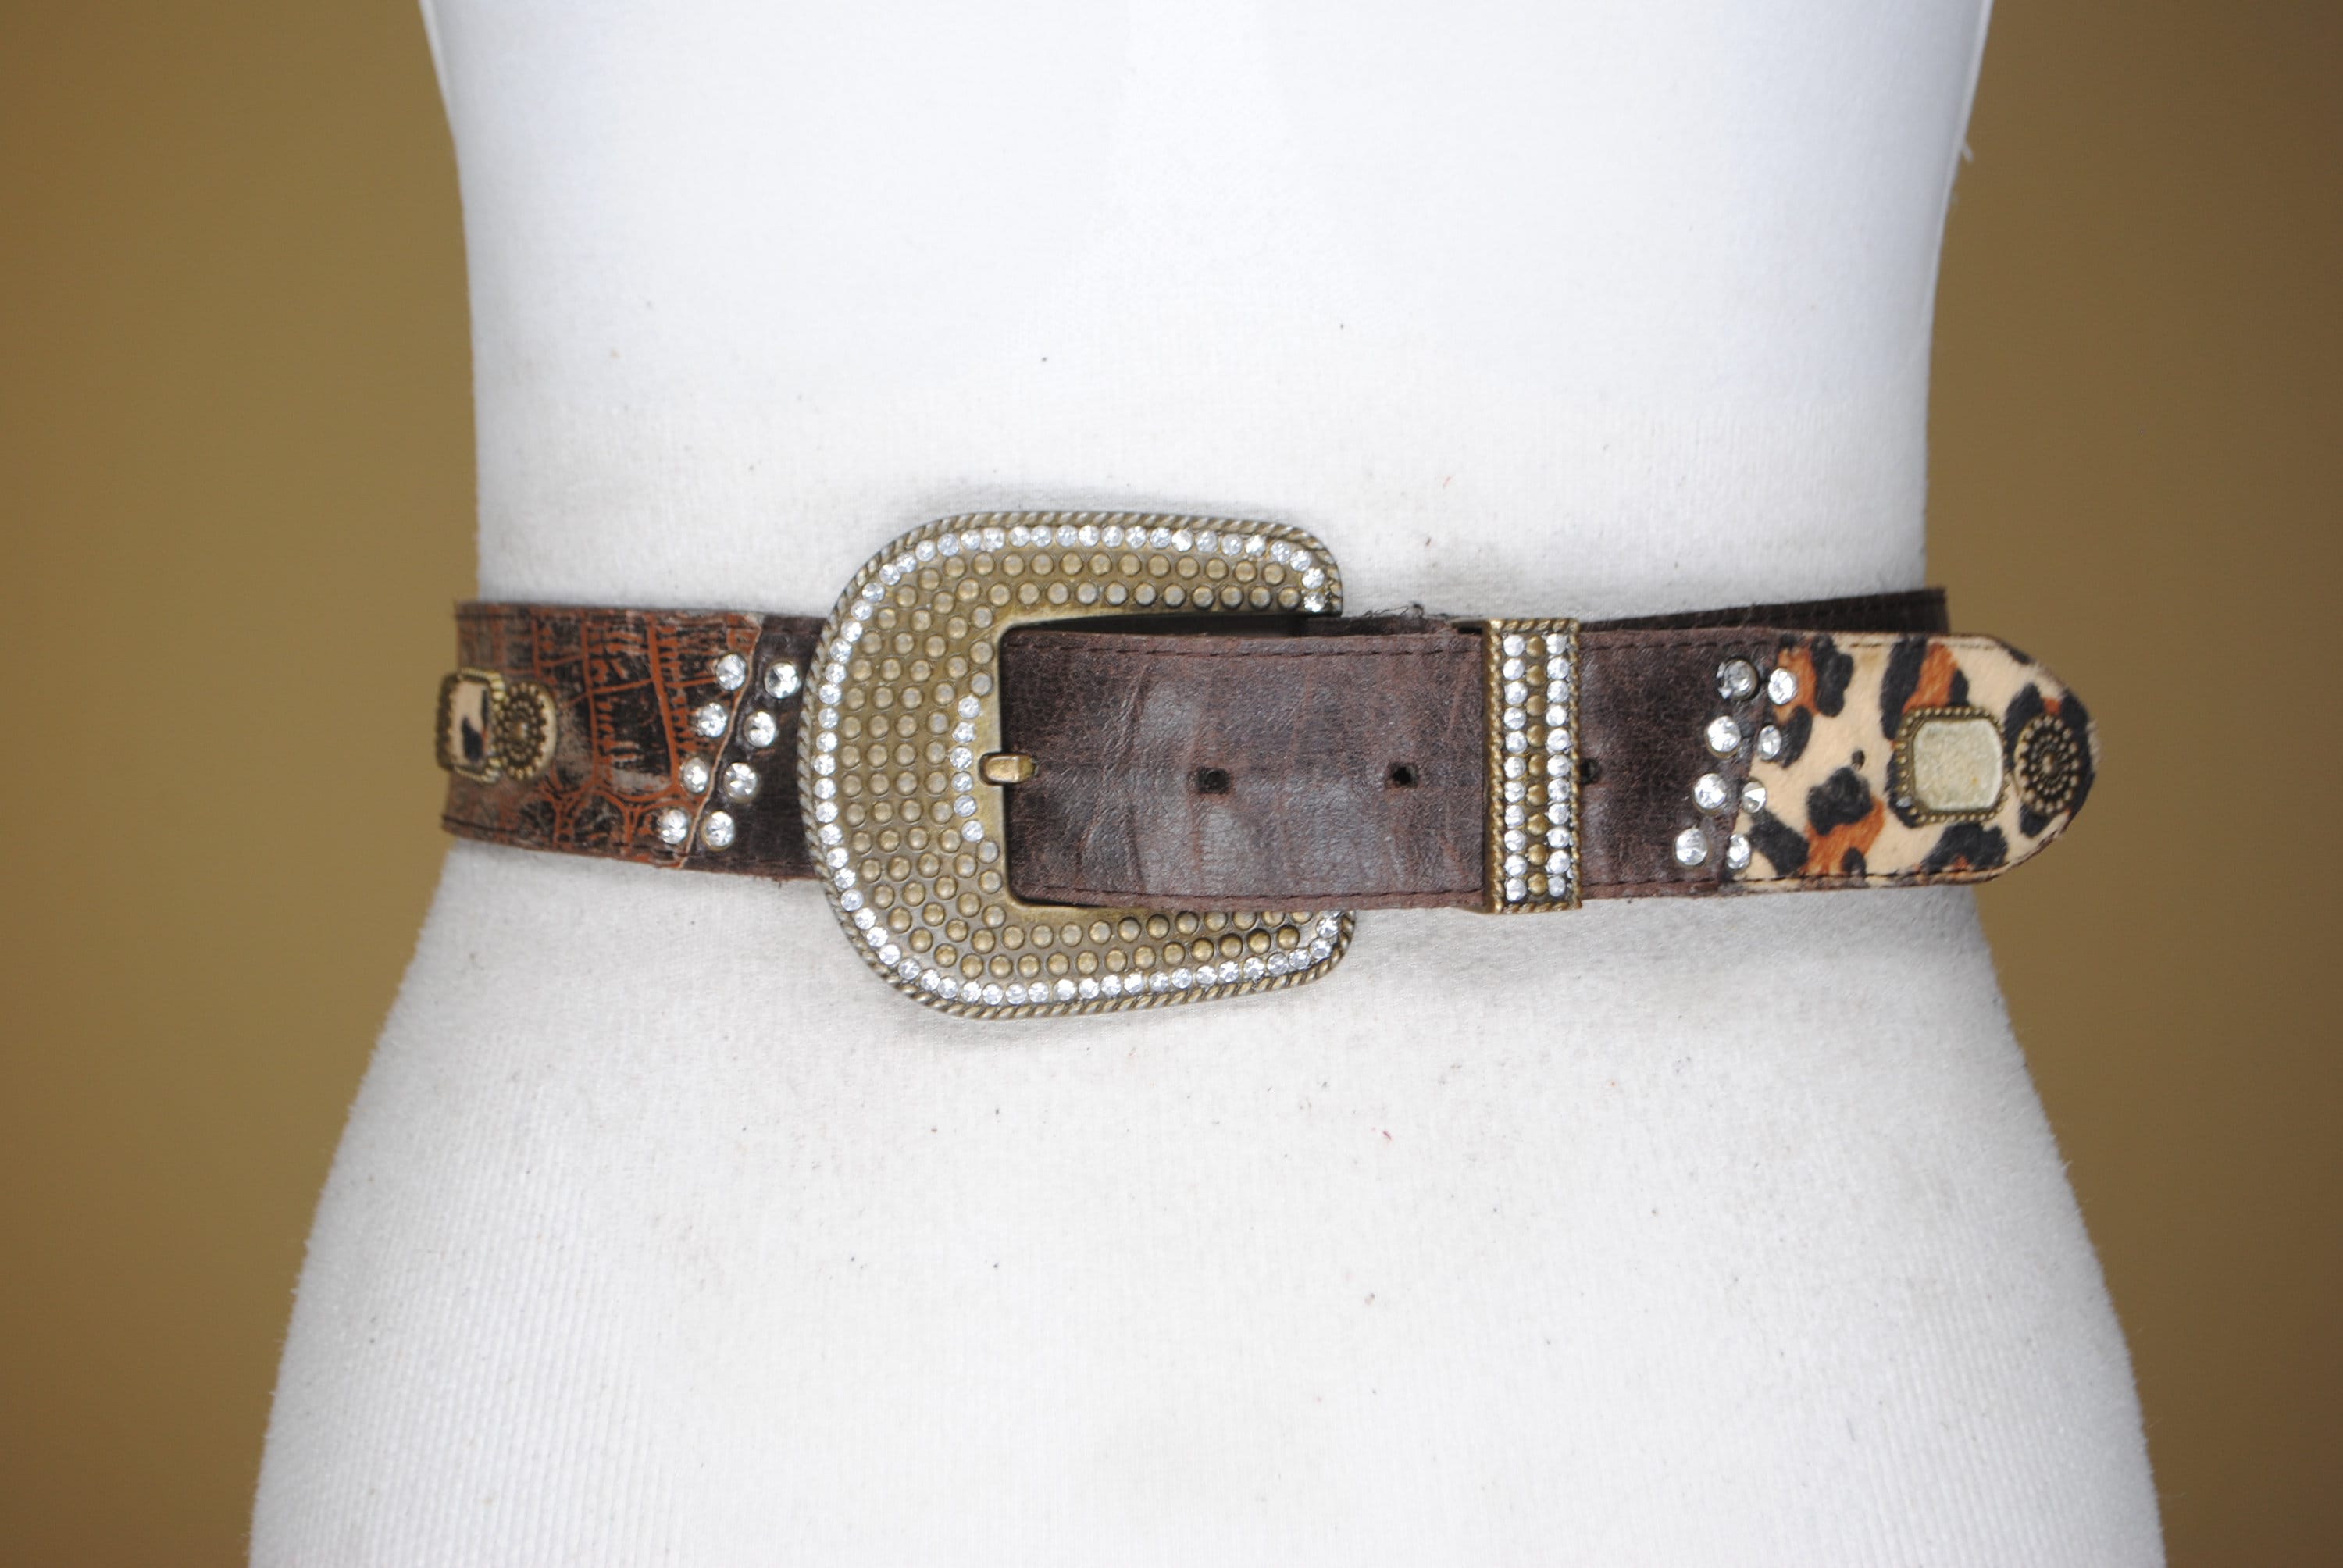 ALPHYLY Womens Leopard Print Leather Belts for Women, Waist Belts Designer  Belt Women at  Women’s Clothing store